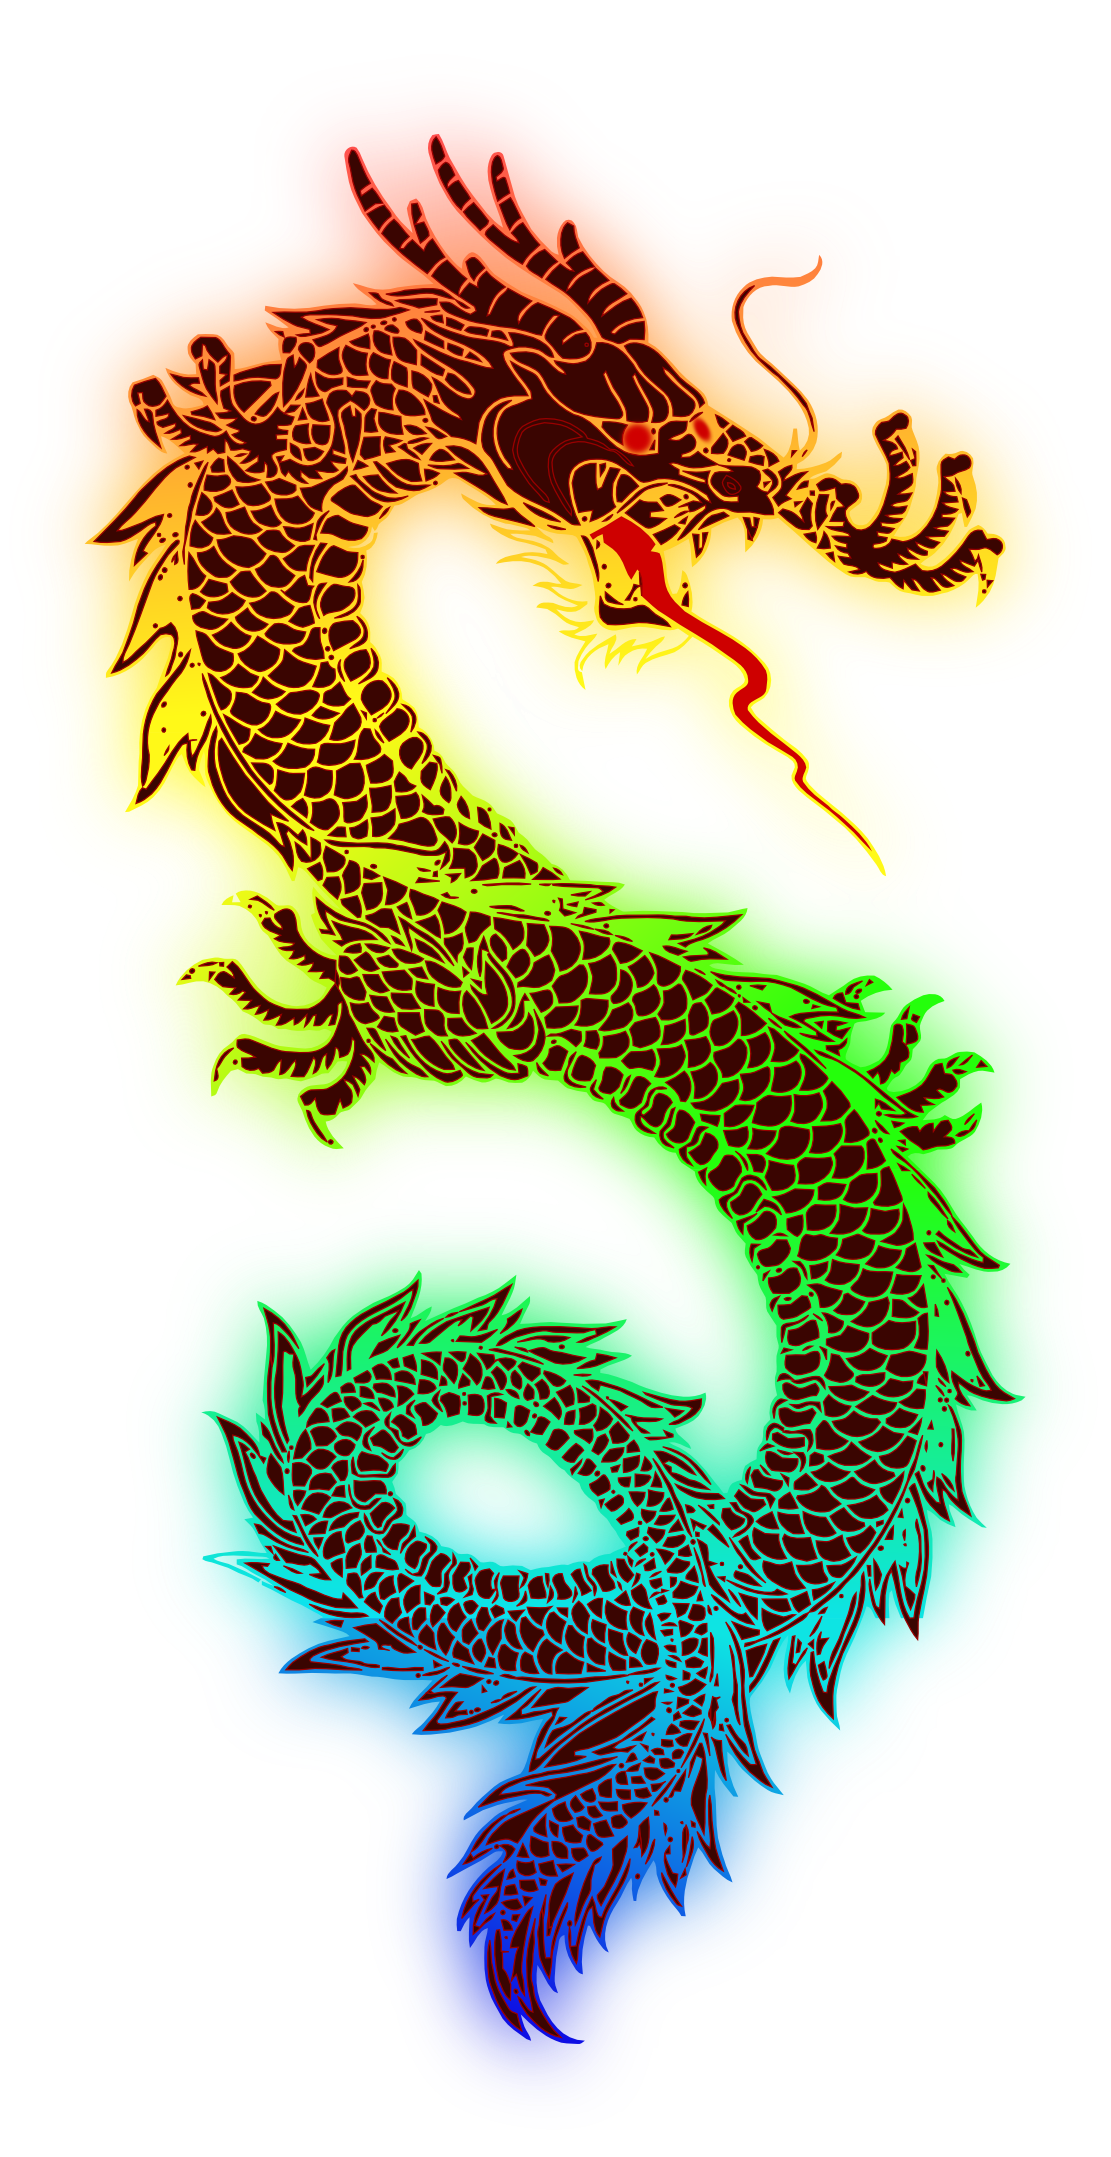 Top 72 Chinese Clip Art Chinese Dragon Clipart Png Transparent Png Images